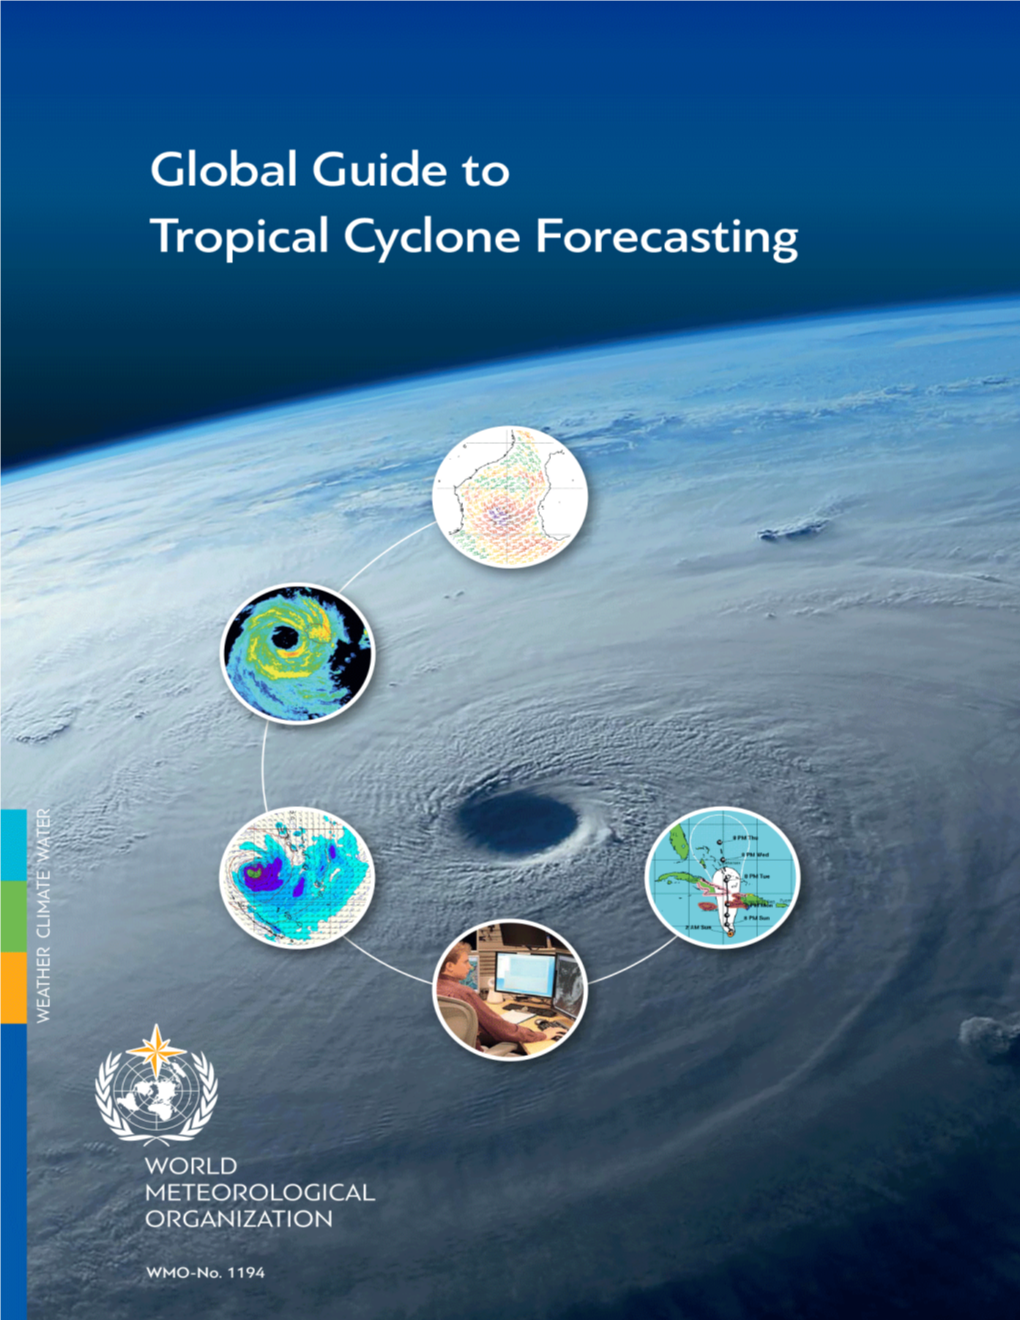 Full Version of Global Guide to Tropical Cyclone Forecasting